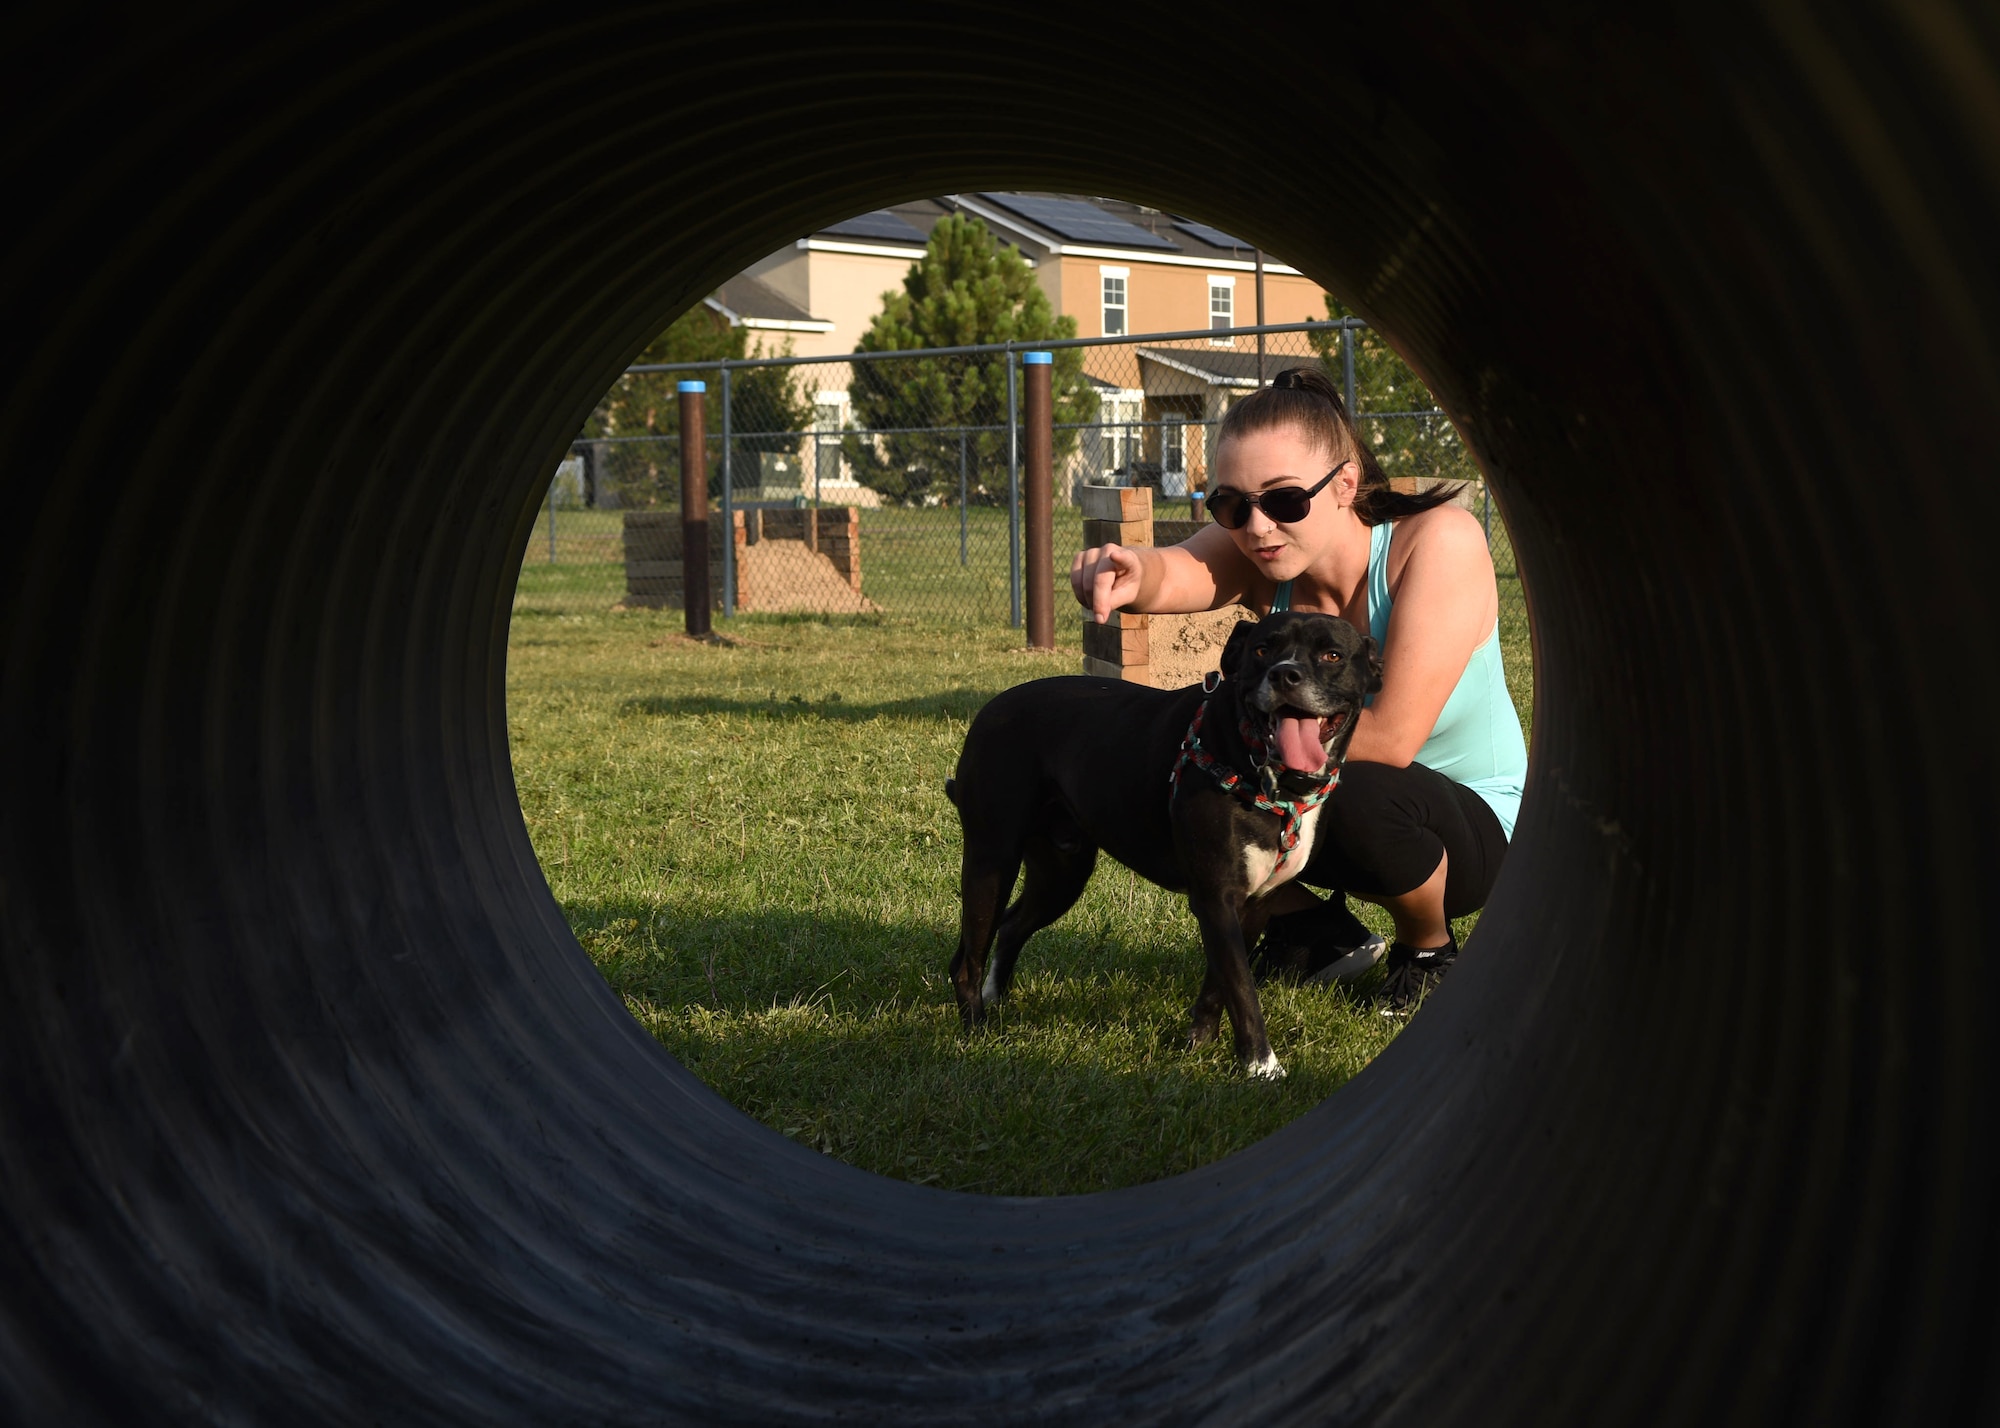 Tiffany Blevins, Air Force spouse, tells her dog, Little Man, to go into the tunnel at the newly transformed dog park on Buckley Air Force Base, Colo., Aug. 4, 2020. Spencer Fogg transformed the dog park to fulfill his community service project requirement to become an Eagle Scout. (U.S. Air Force photo by Airman 1st Class Haley N. Blevins)